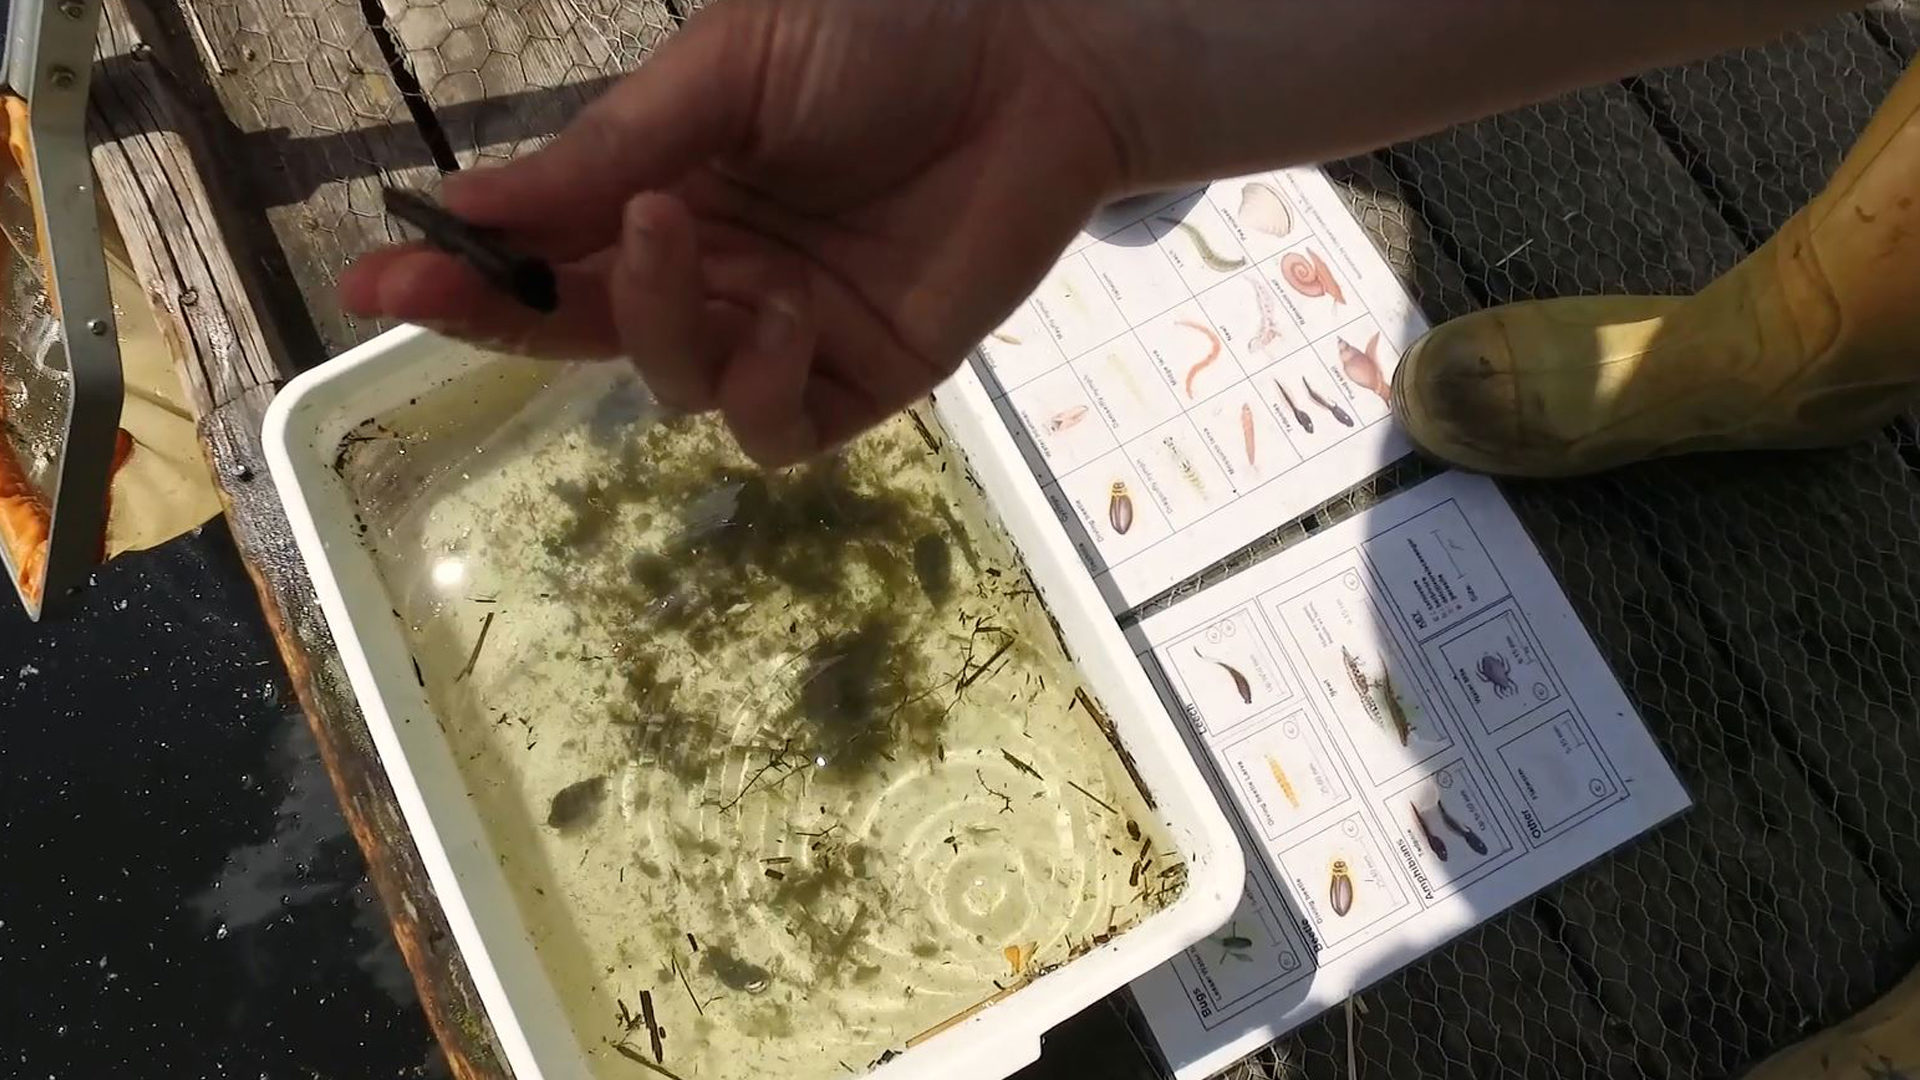 Somebody pond dipping, holding an insect above a tray with an identification guide next to it